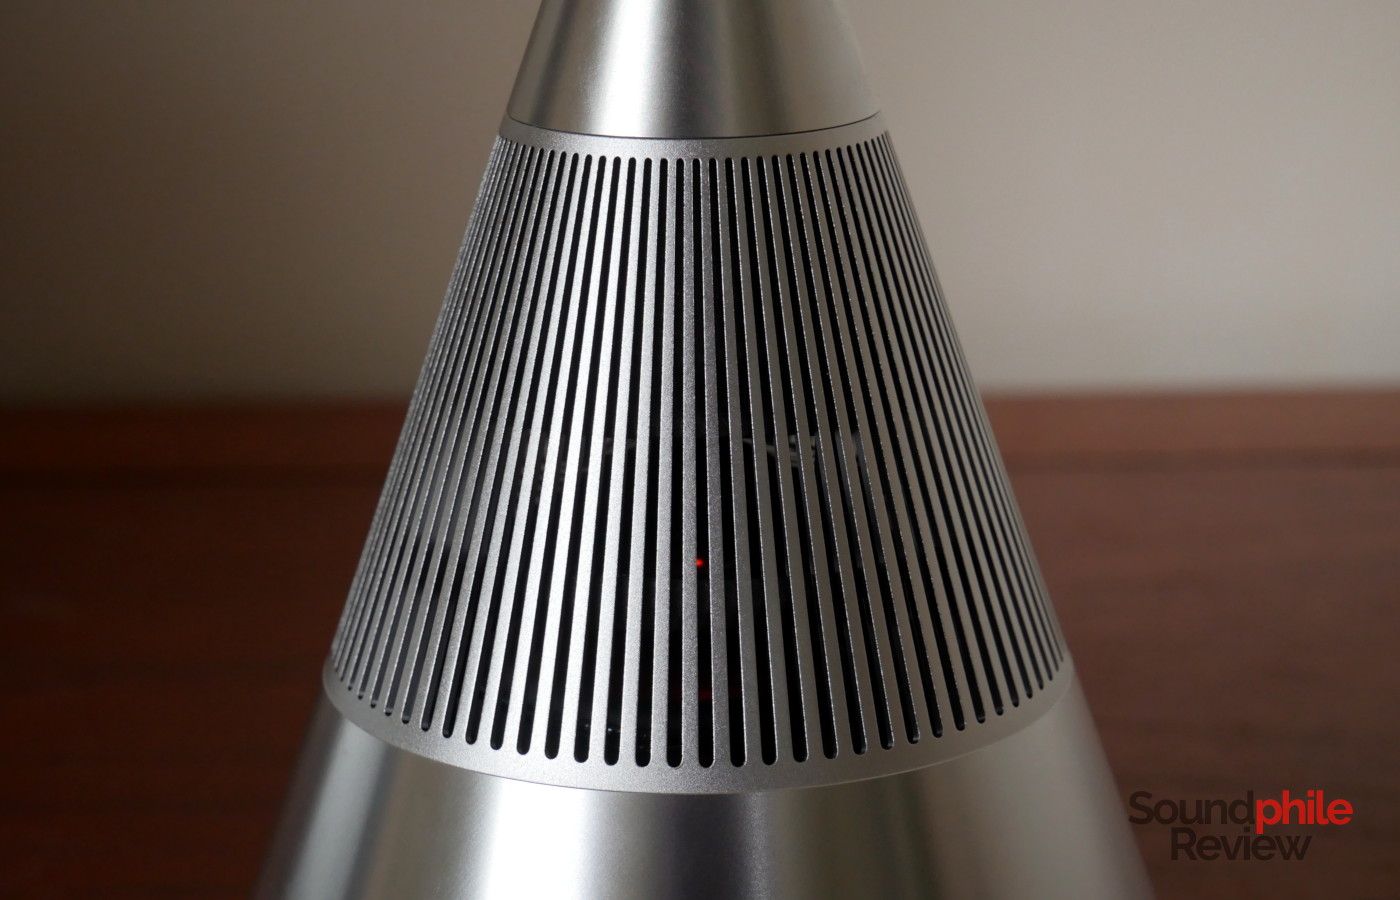 The TRETTITRE TreSound Mini has vertical slits from where the sounds comes out